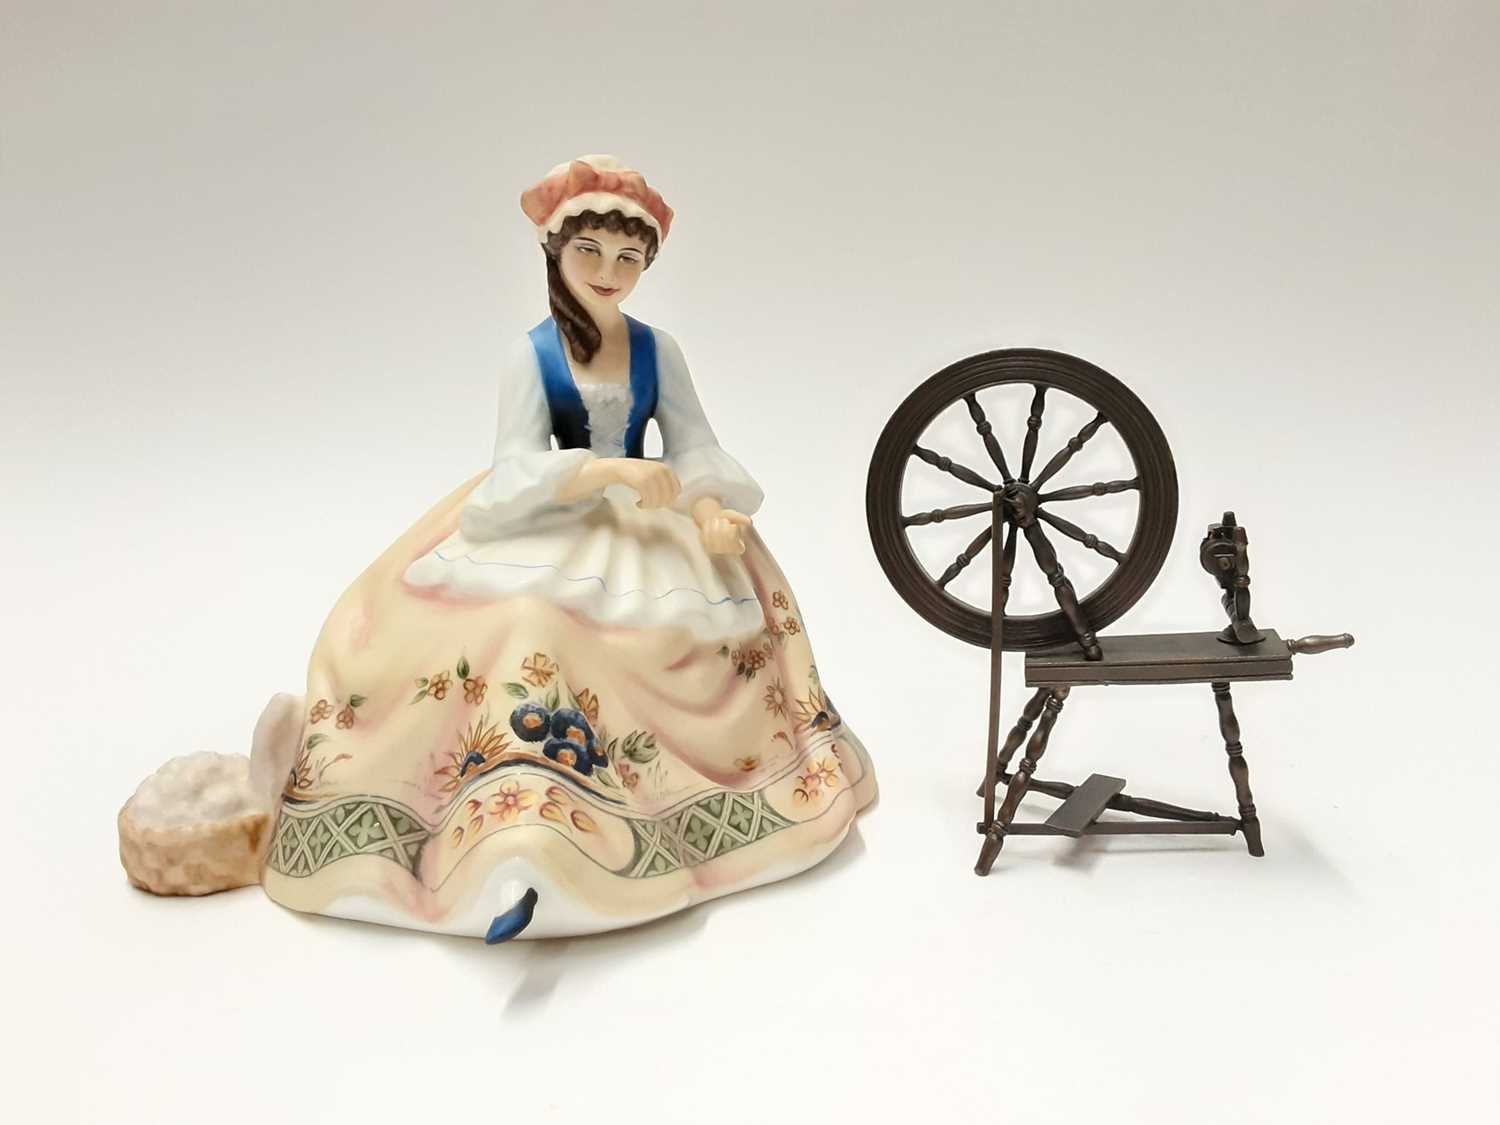 Lot 135 - Royal Doulton limited edition Gentle Arts figure - Spinning HN2390 on plinth base, modelled by Peggy Davies, number 429 of 750, boxed with certificate